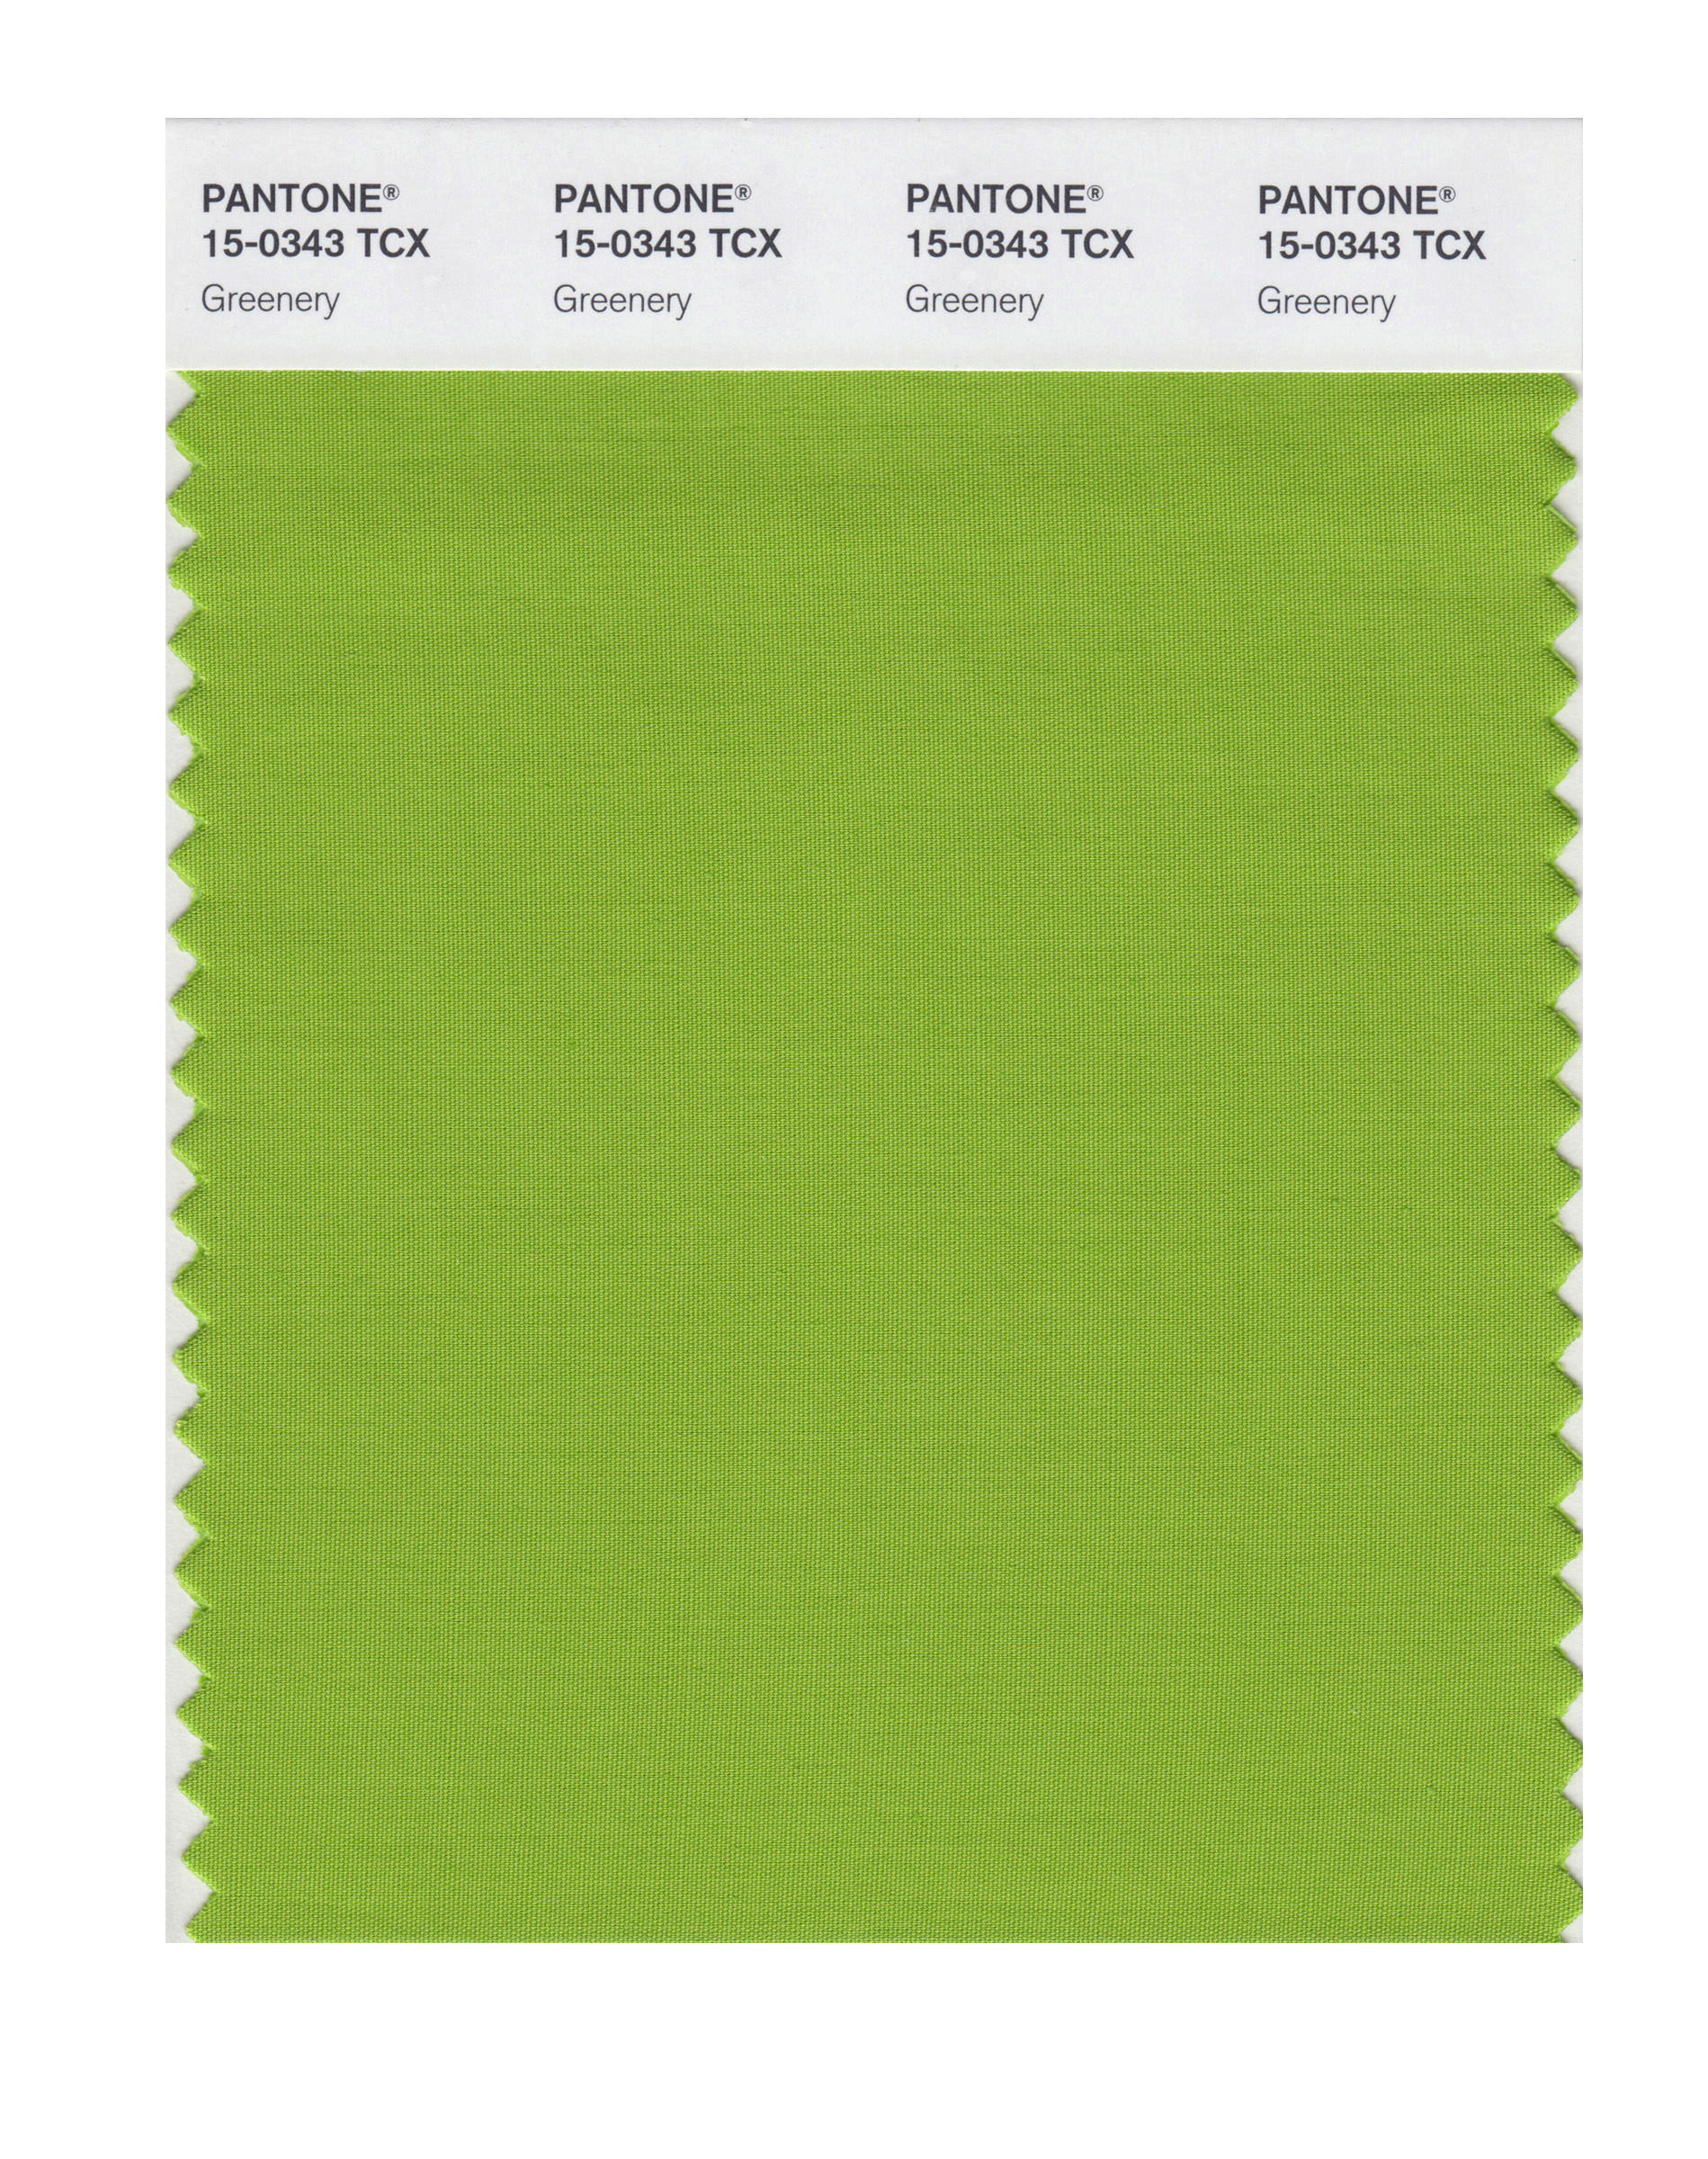 This image released by Pantone shows a color swatch called "greenery", which has been named as the color of the year for 2017 by the Pantone Color Institute. (Pantone/AP)